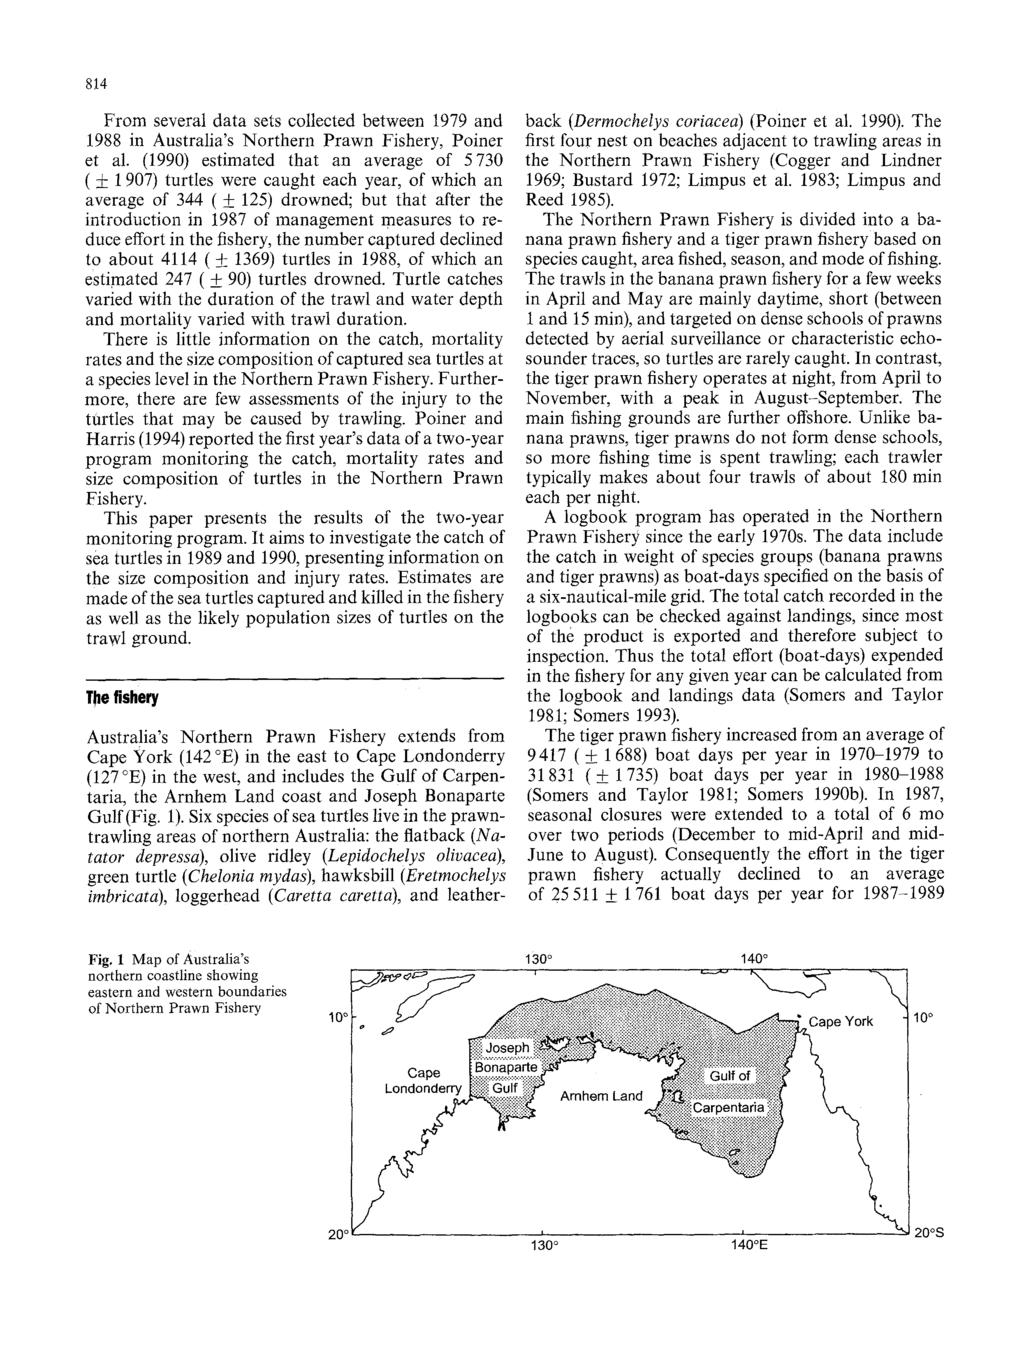 814 From several data sets collected between 1979 and 1988 in Australia's Northern Prawn Fishery, Poiner et al.